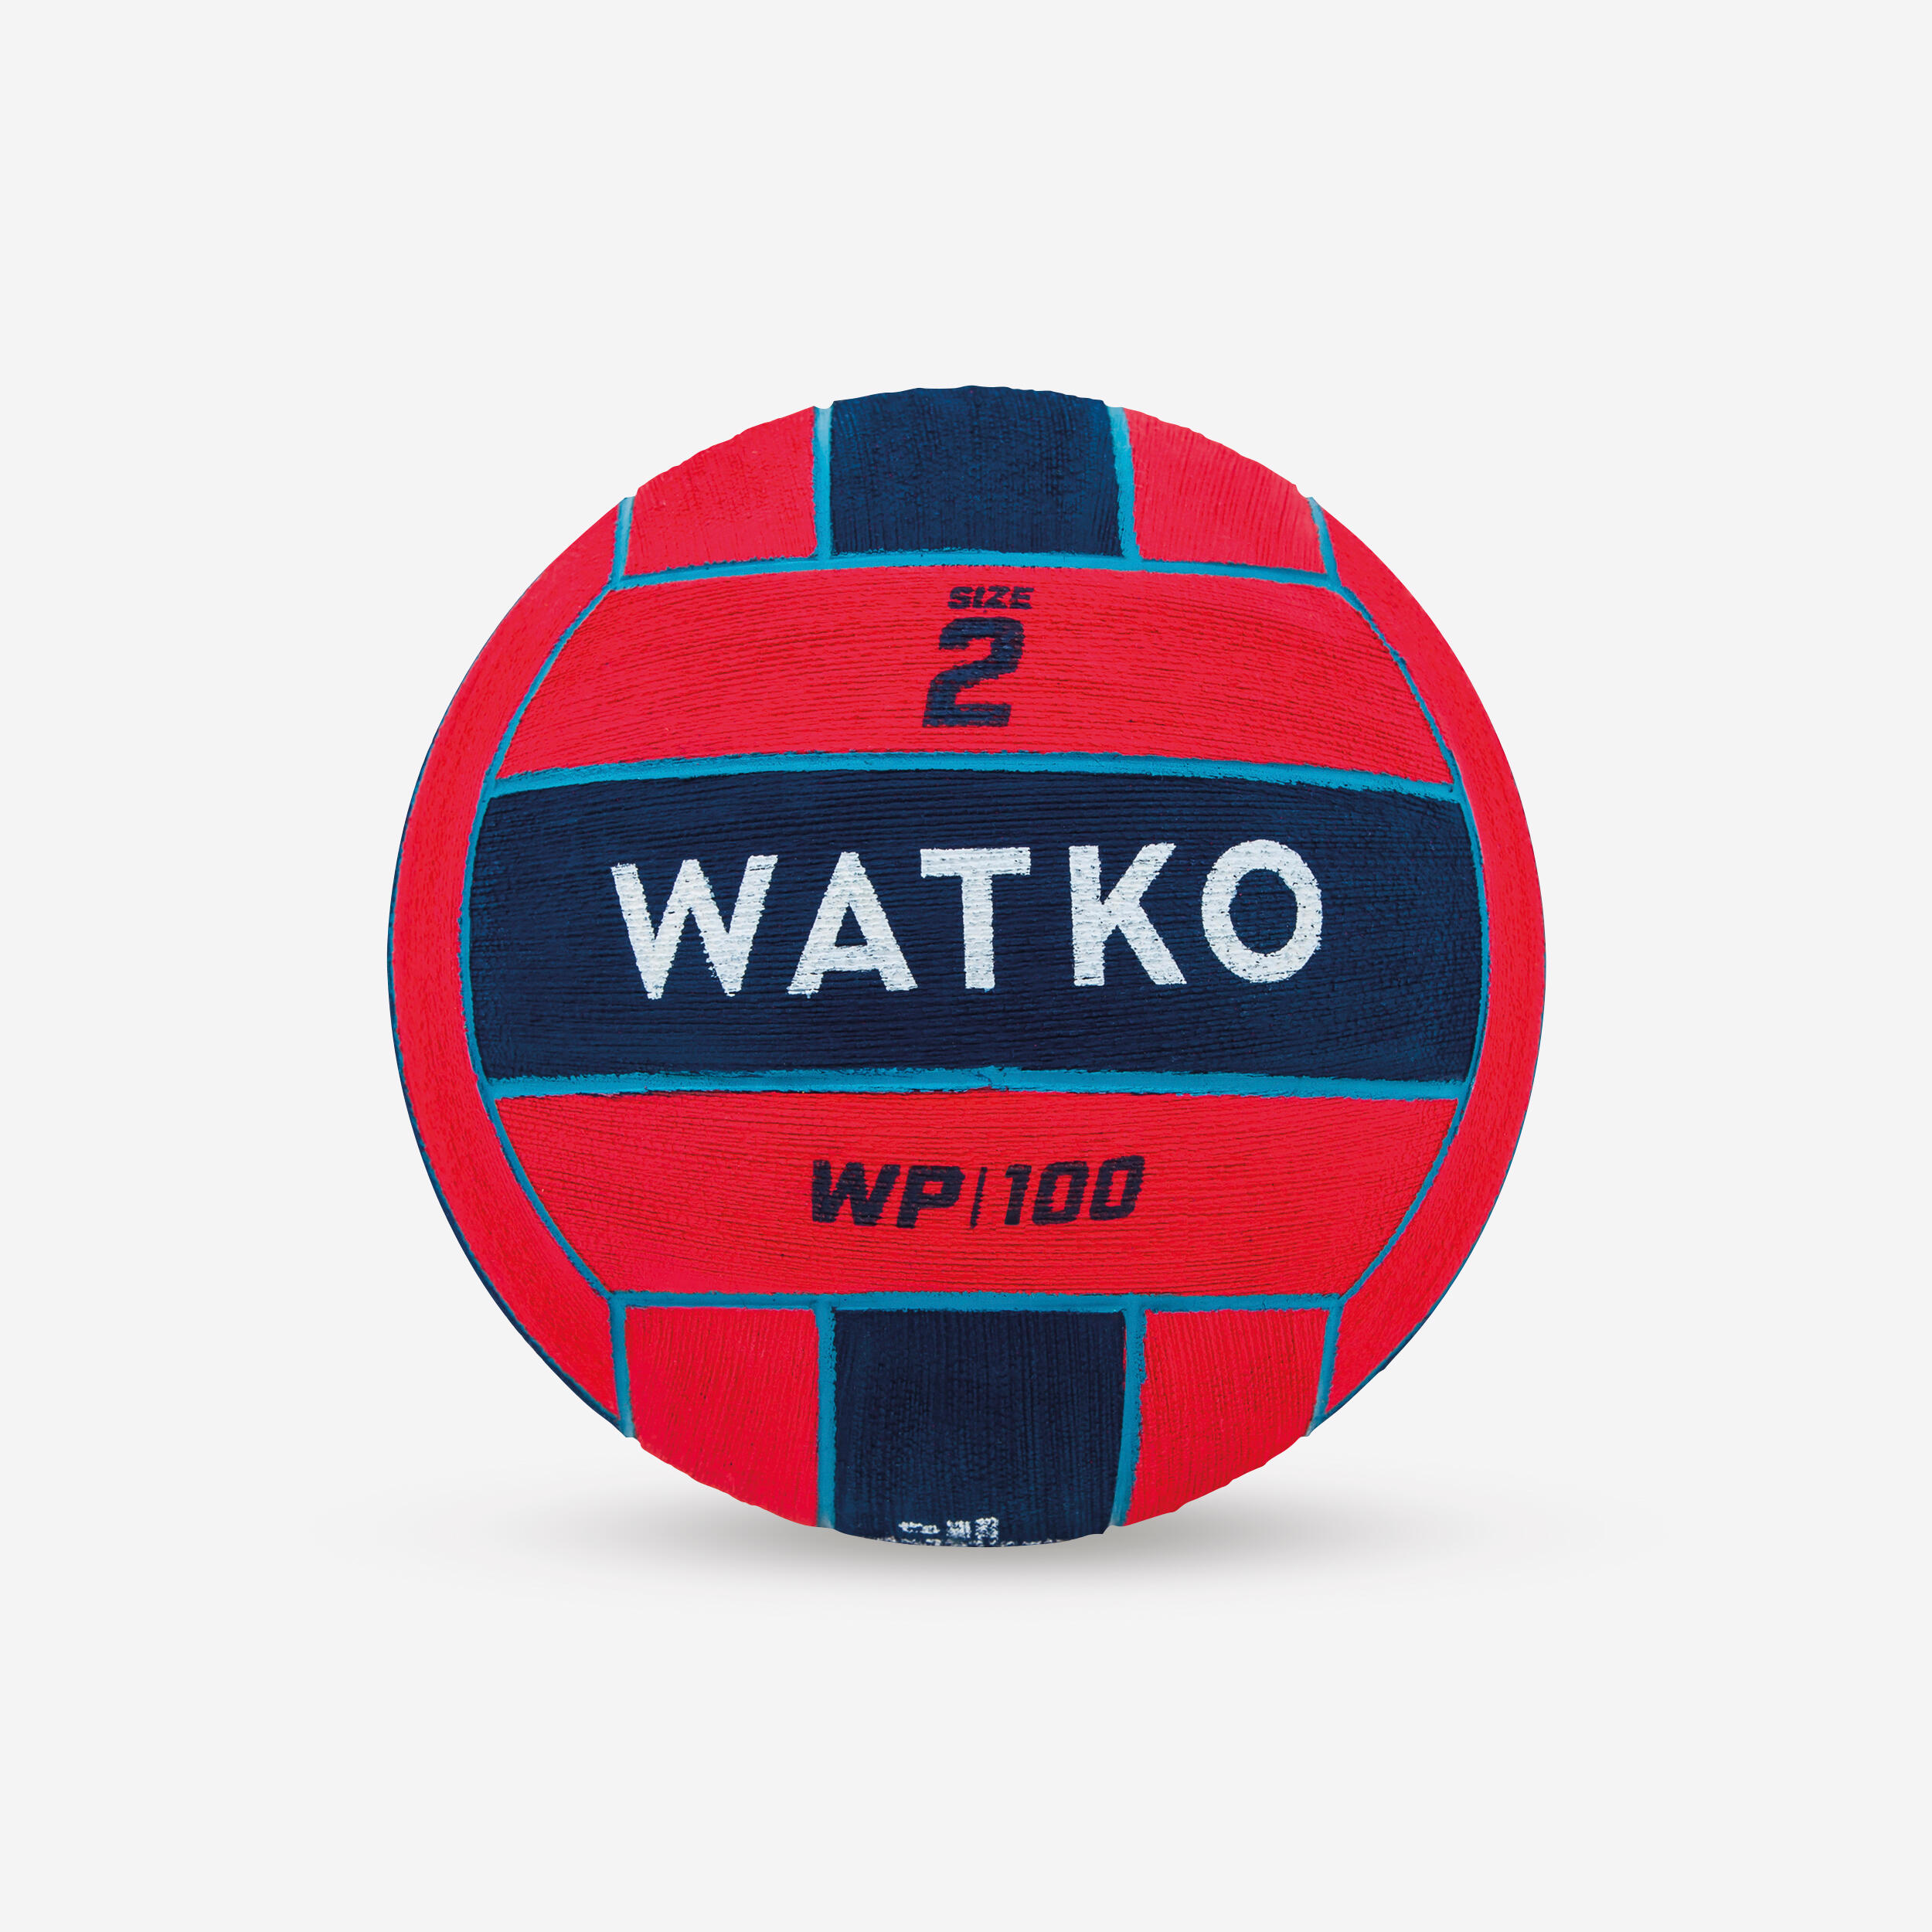 WATKO WATER POLO BALL WP100 SIZE 2 - RED / BLUE